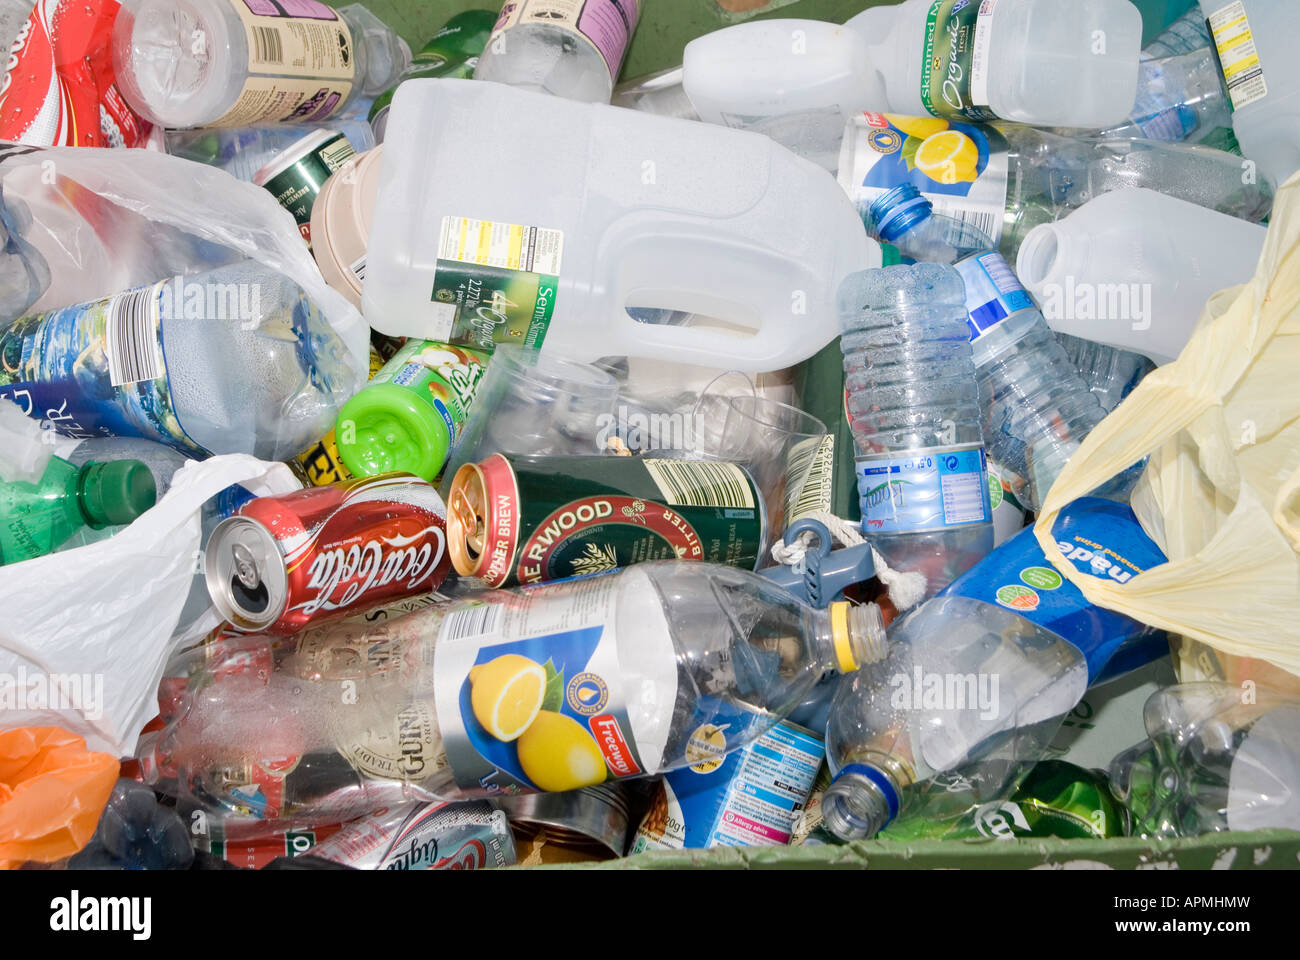 mixed waste for recycling in the uk Stock Photo